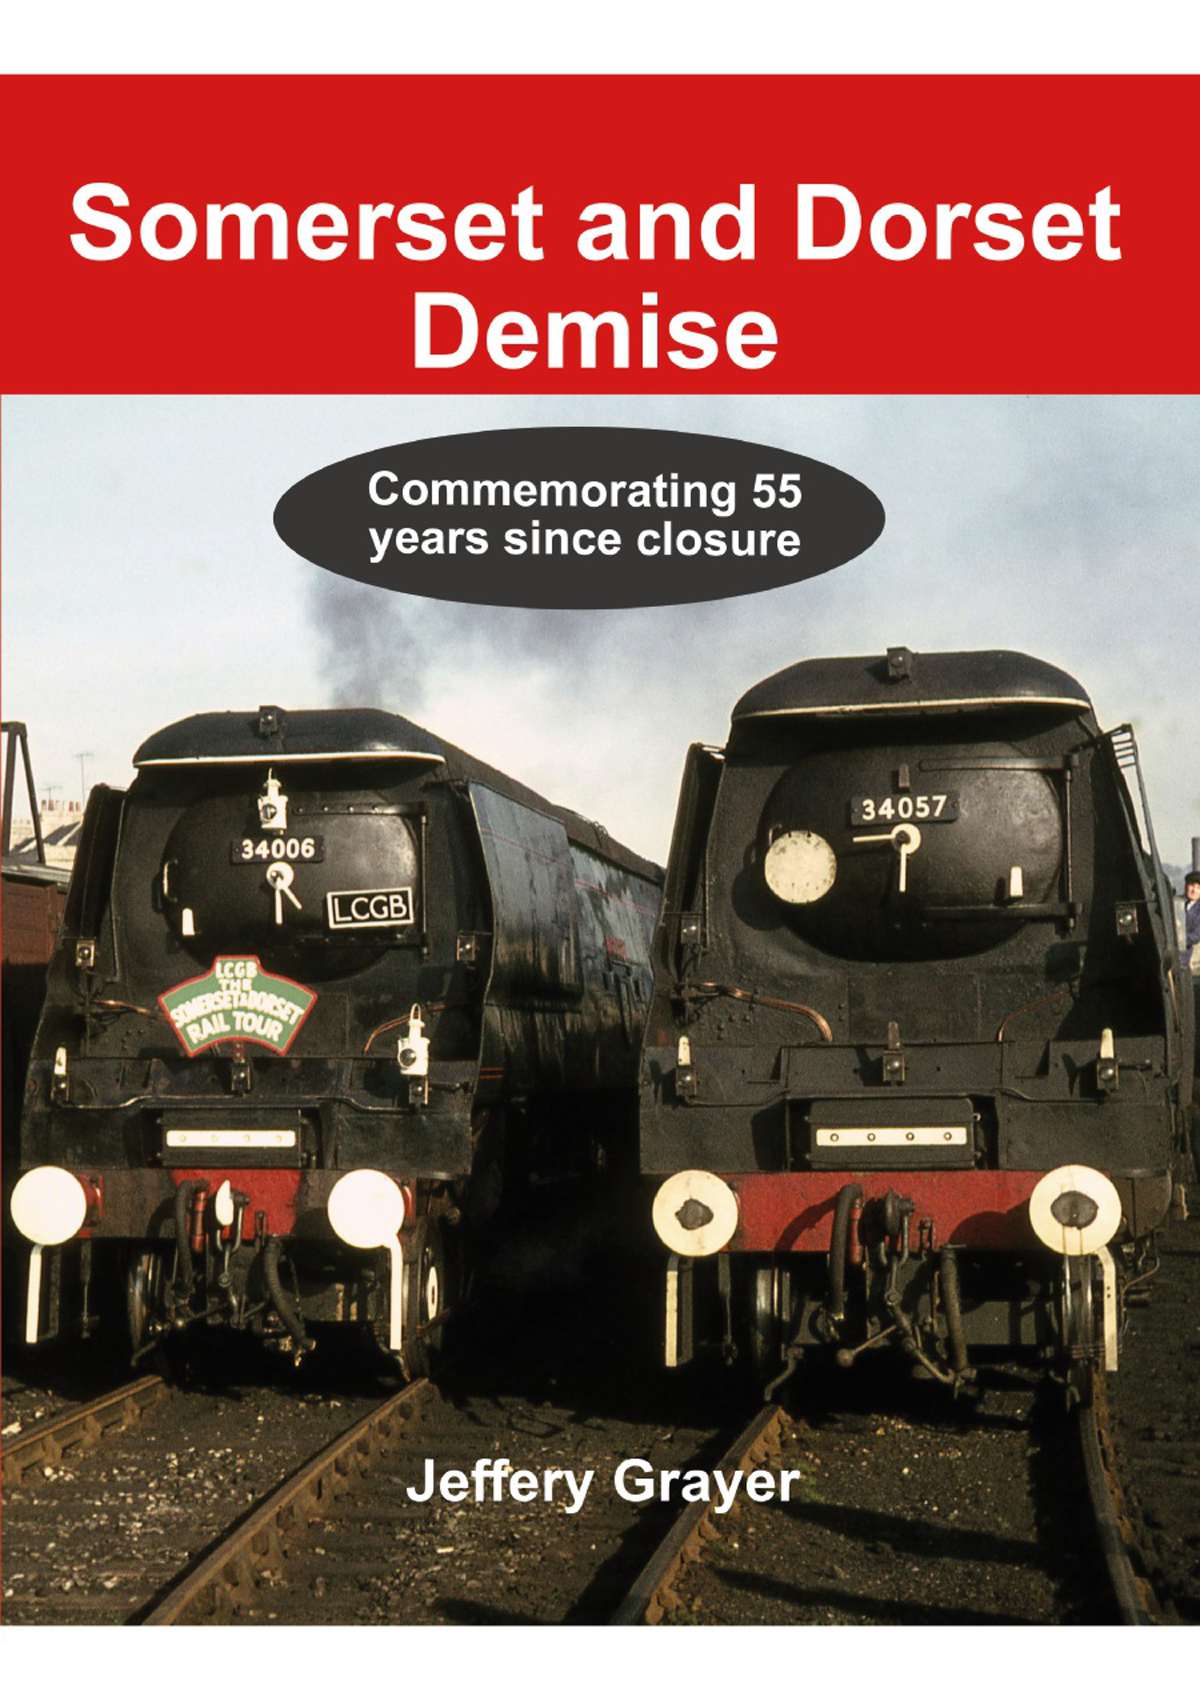 Somerset & Dorset Demise - Commemorating 55 years since closure